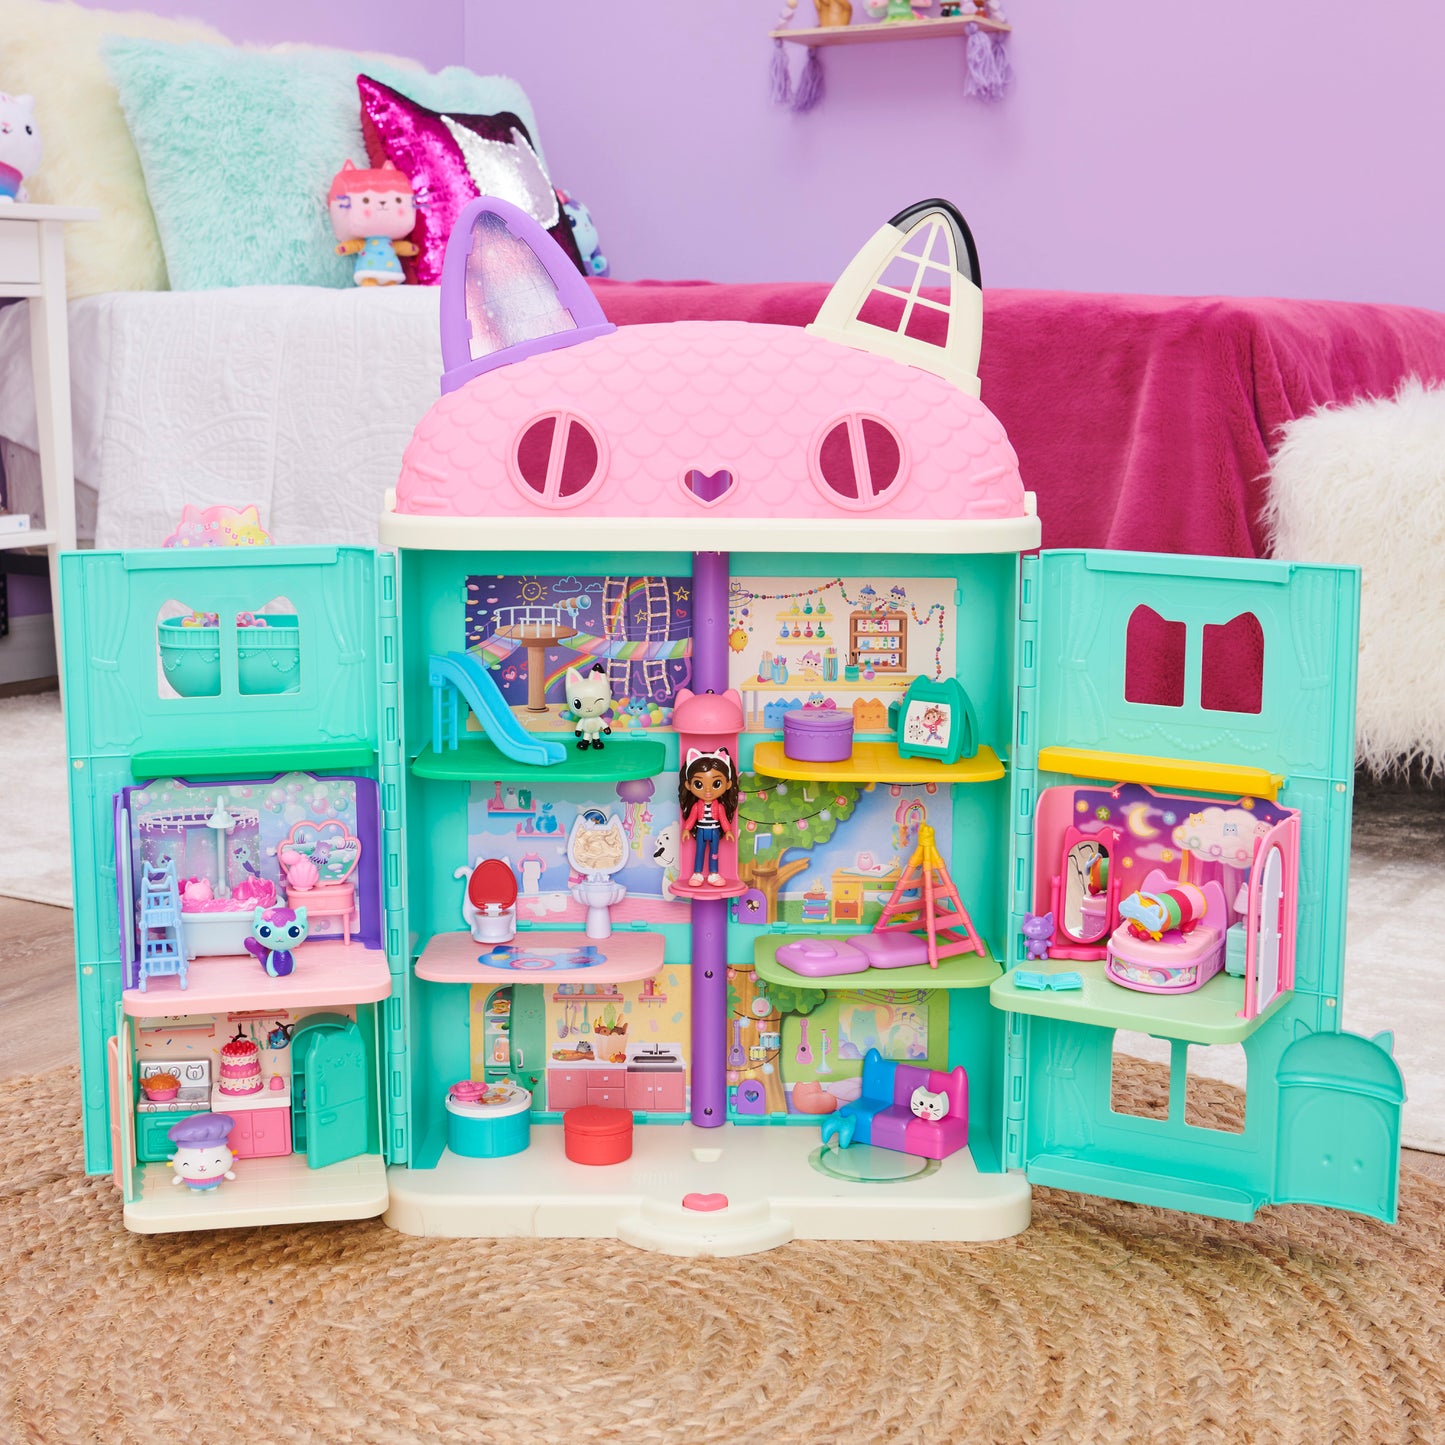 Gabby’s Dollhouse, Pillow Cat’s Sweet Dreams Bedroom Playset with Figure